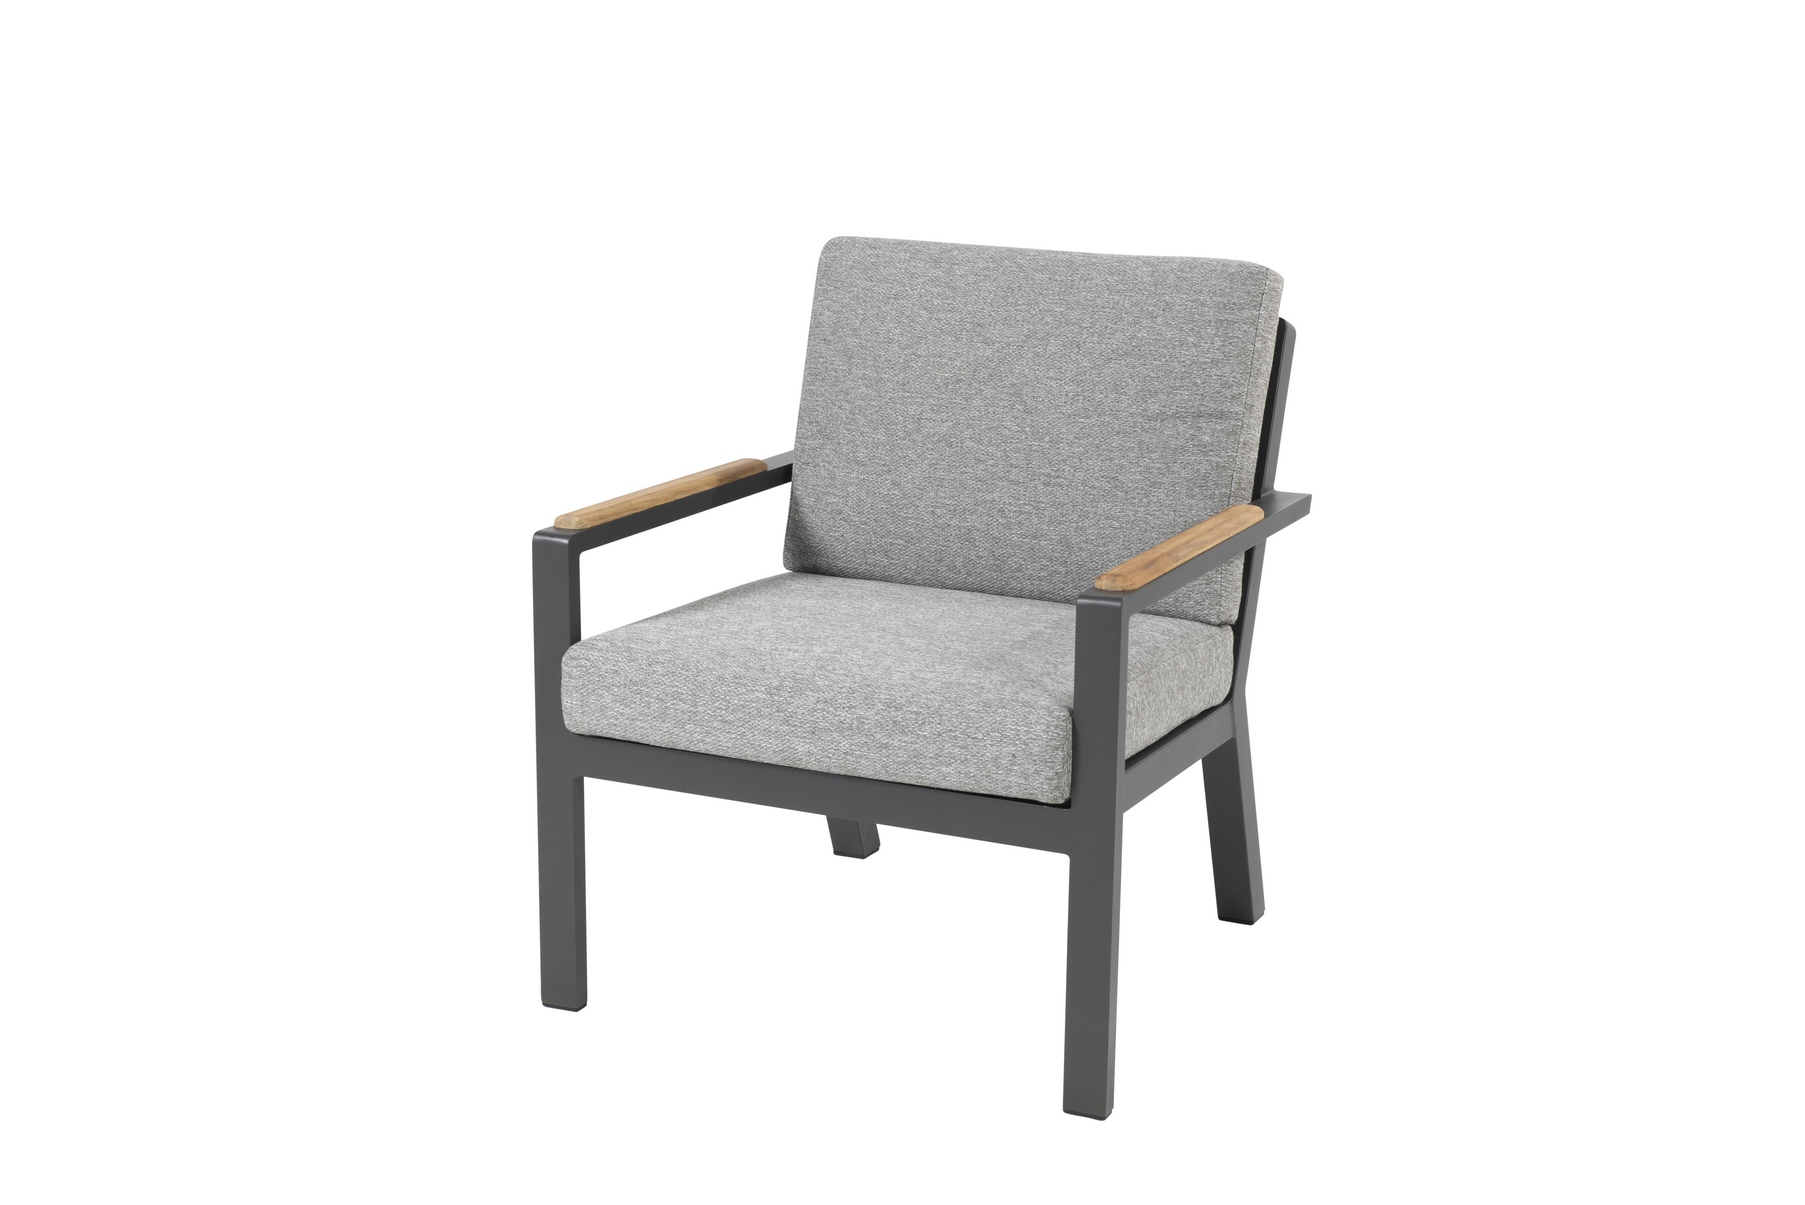 19865__Proton_low_dining_arm_chair_anthracite_with_2_cushions_011.jpg